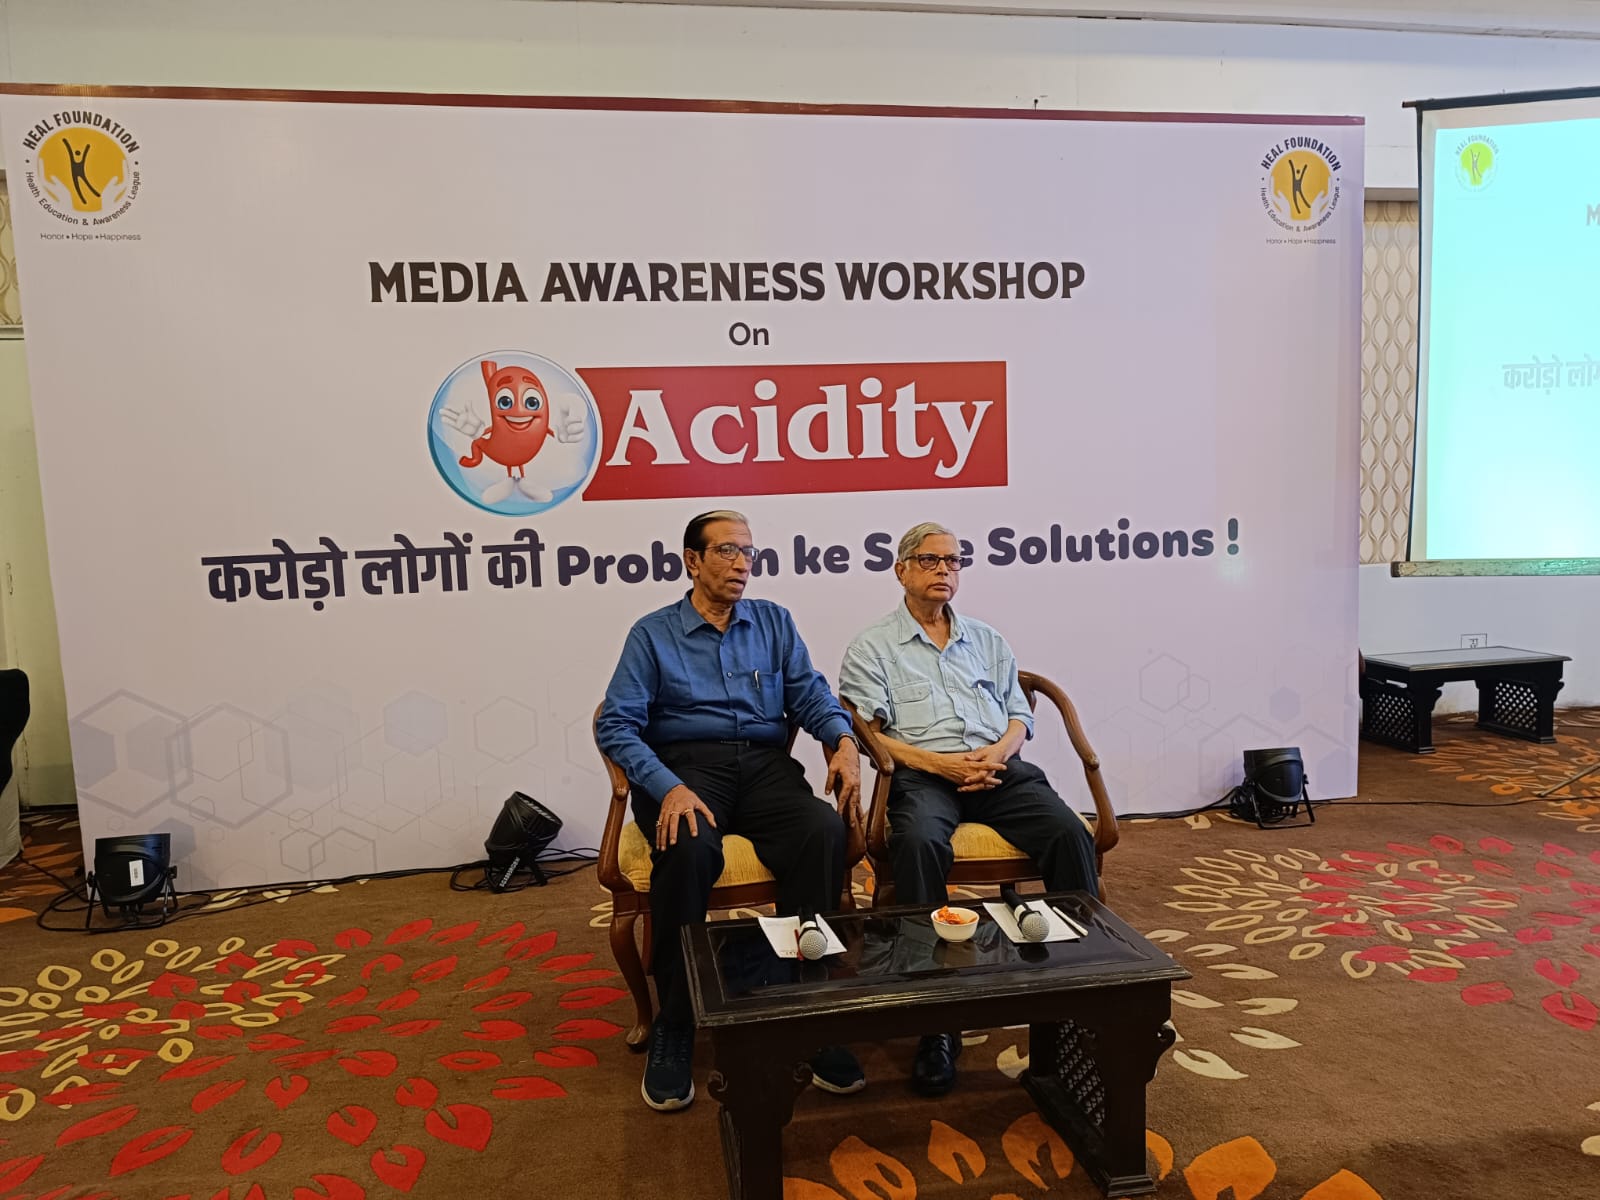 Dr (Prof.) Arup Das Biswas and Dr (Prof.) Apurba Kumar Mukherjee discussed the causes, effects on health, and safe ways to resolve 'Acidity' during a media awareness workshop in Kolkata organised by the Heal Foundation on “Acidity – Karodon Logon Ki Problem Ke Safe Solutions.”